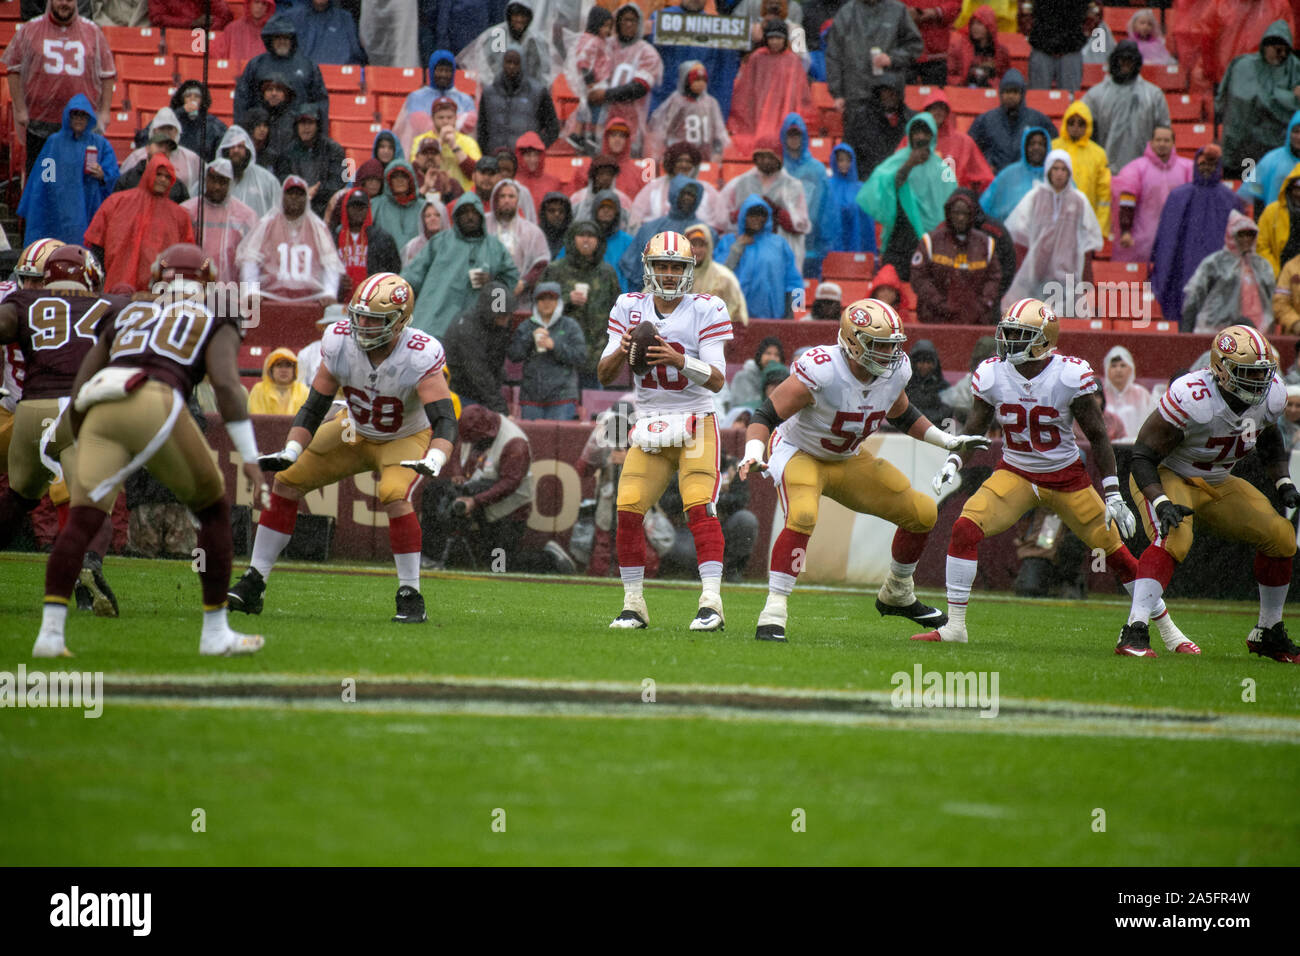 San Francisco 49ers quarterback Jimmy Garoppolo (10) looks for a receiver during the first quarter against the San Francisco 49ers at FedEx Field in Landover, Maryland on Sunday, October 20, 2018. Also pictured from left are: Washington Redskins nose tackle Daron Payne (94), strong safety Landon Collins (20), San Francisco 49ers offensive guard Mike Person (68), center Weston Richburg (58), running back Tevin Coleman (26) and offensive guard Laken Tomlinson (75). The 49ers won the game 9 - 0.Credit: Ron Sachs/CNP | usage worldwide Stock Photo